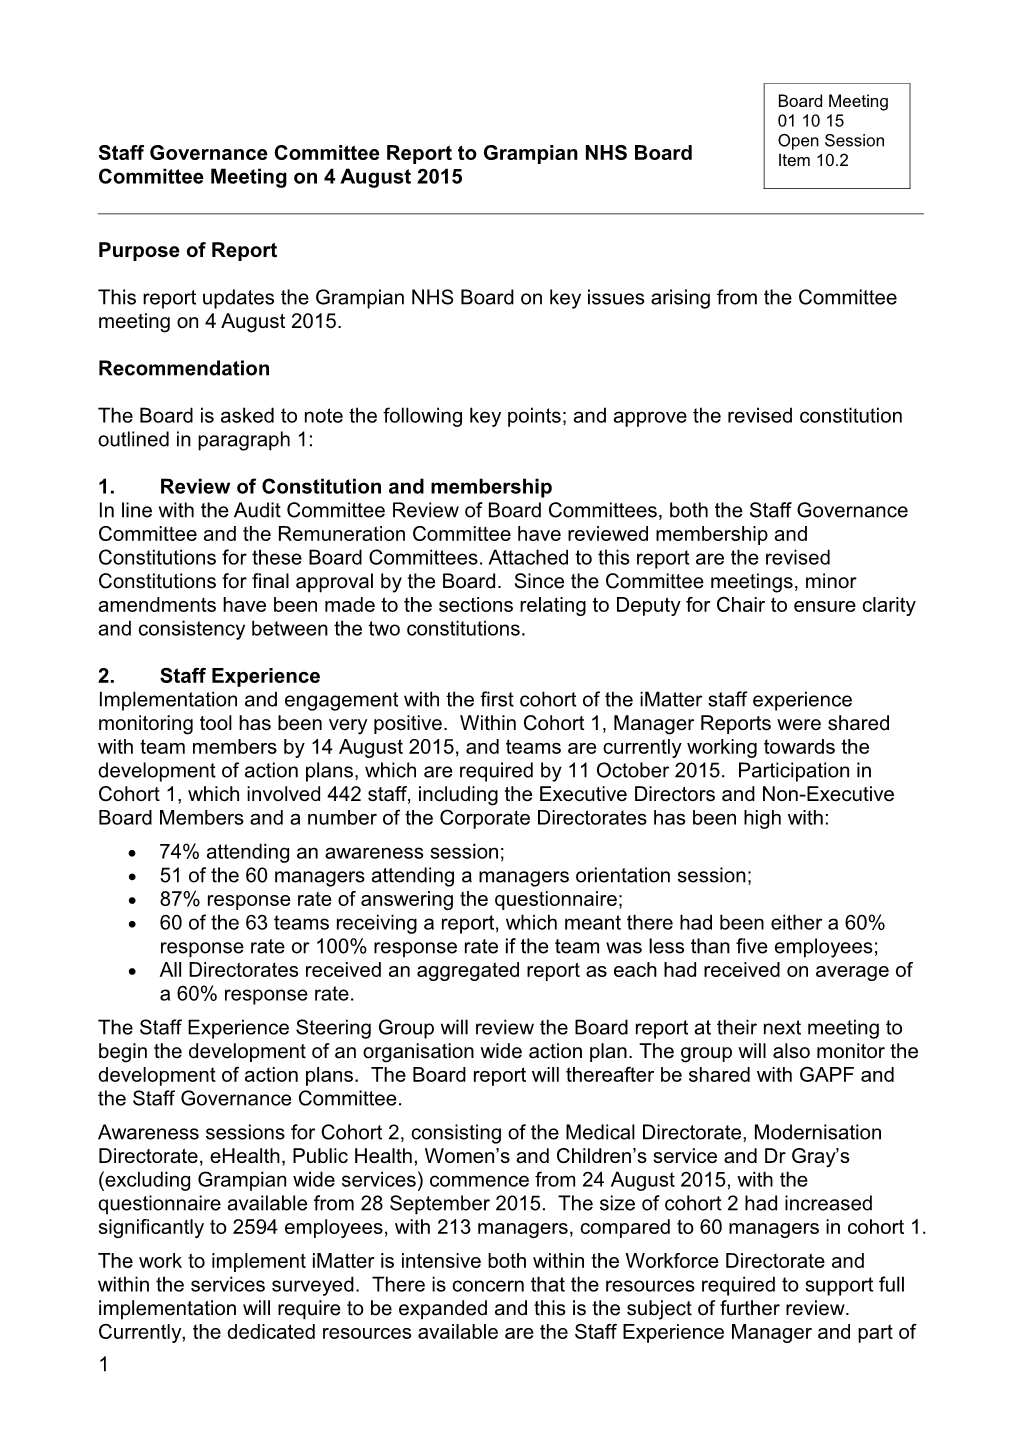 Item 10.2 Staff Governance Committee Report for 1 Oct